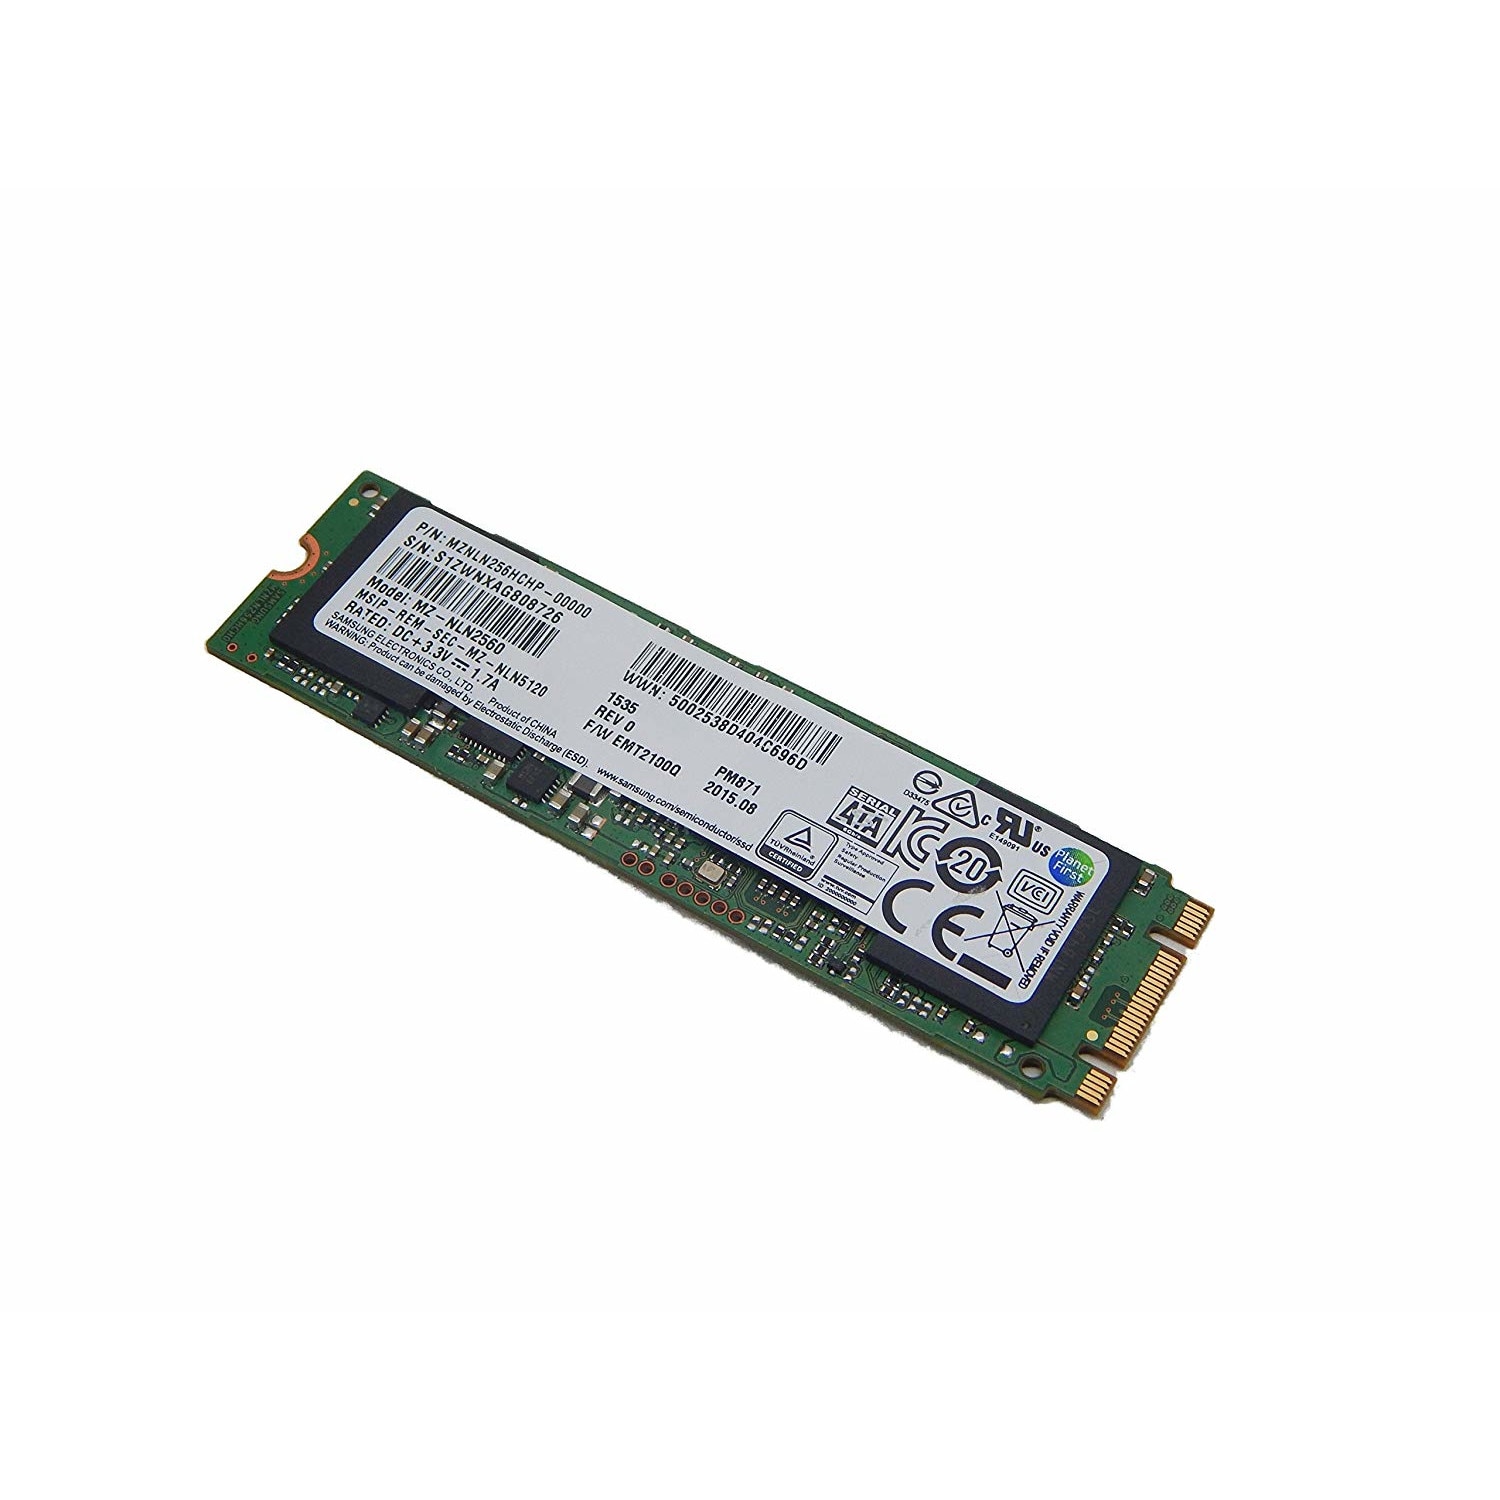 Solid-State (SSD) Samsung PM981, 512Gb, 3D M.2, PCI-E, - eMAG.ro